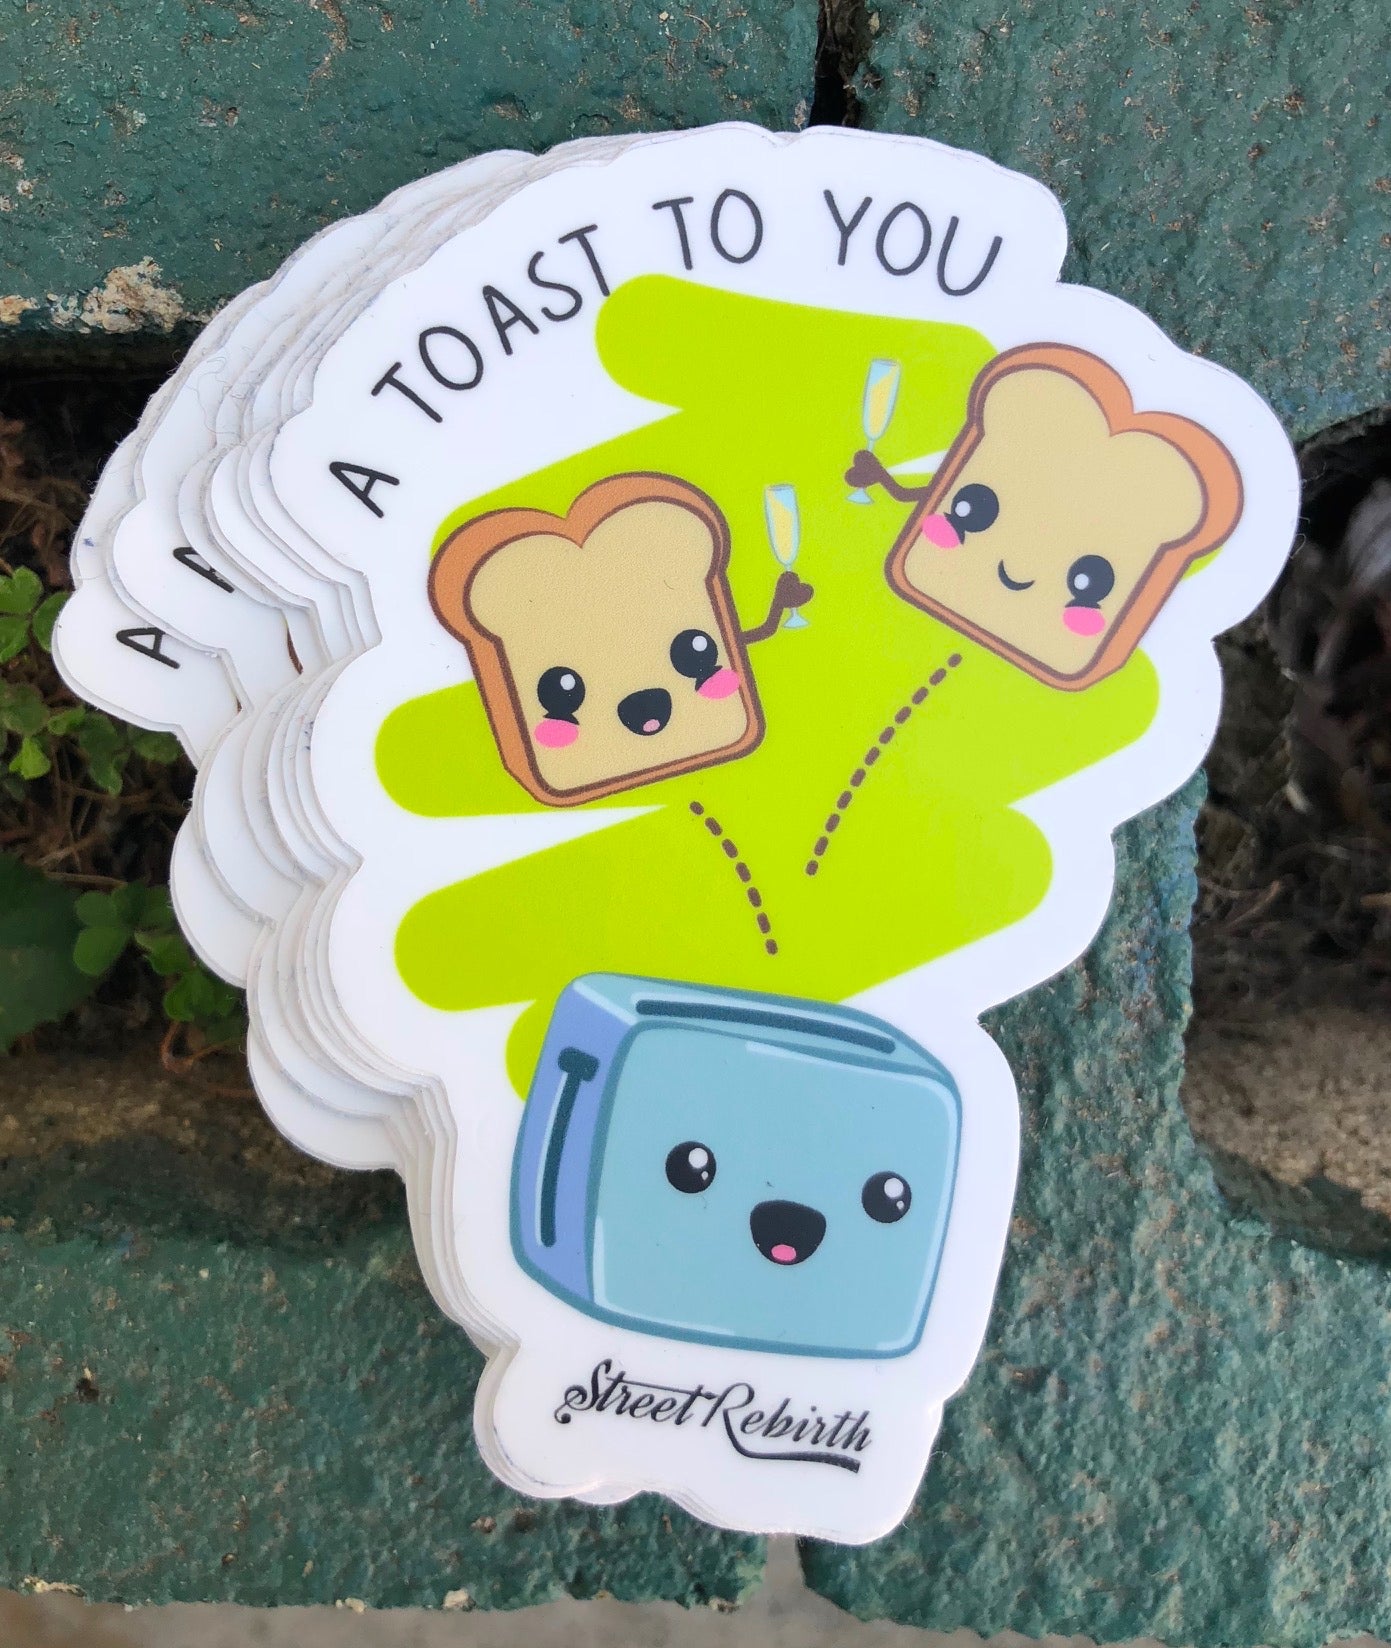 1 A Toast To You Sticker – One 4 Inch Water Proof Vinyl Sticker – For Hydro Flask, Skateboard, Laptop, Planner, Car, Collecting, Gifting